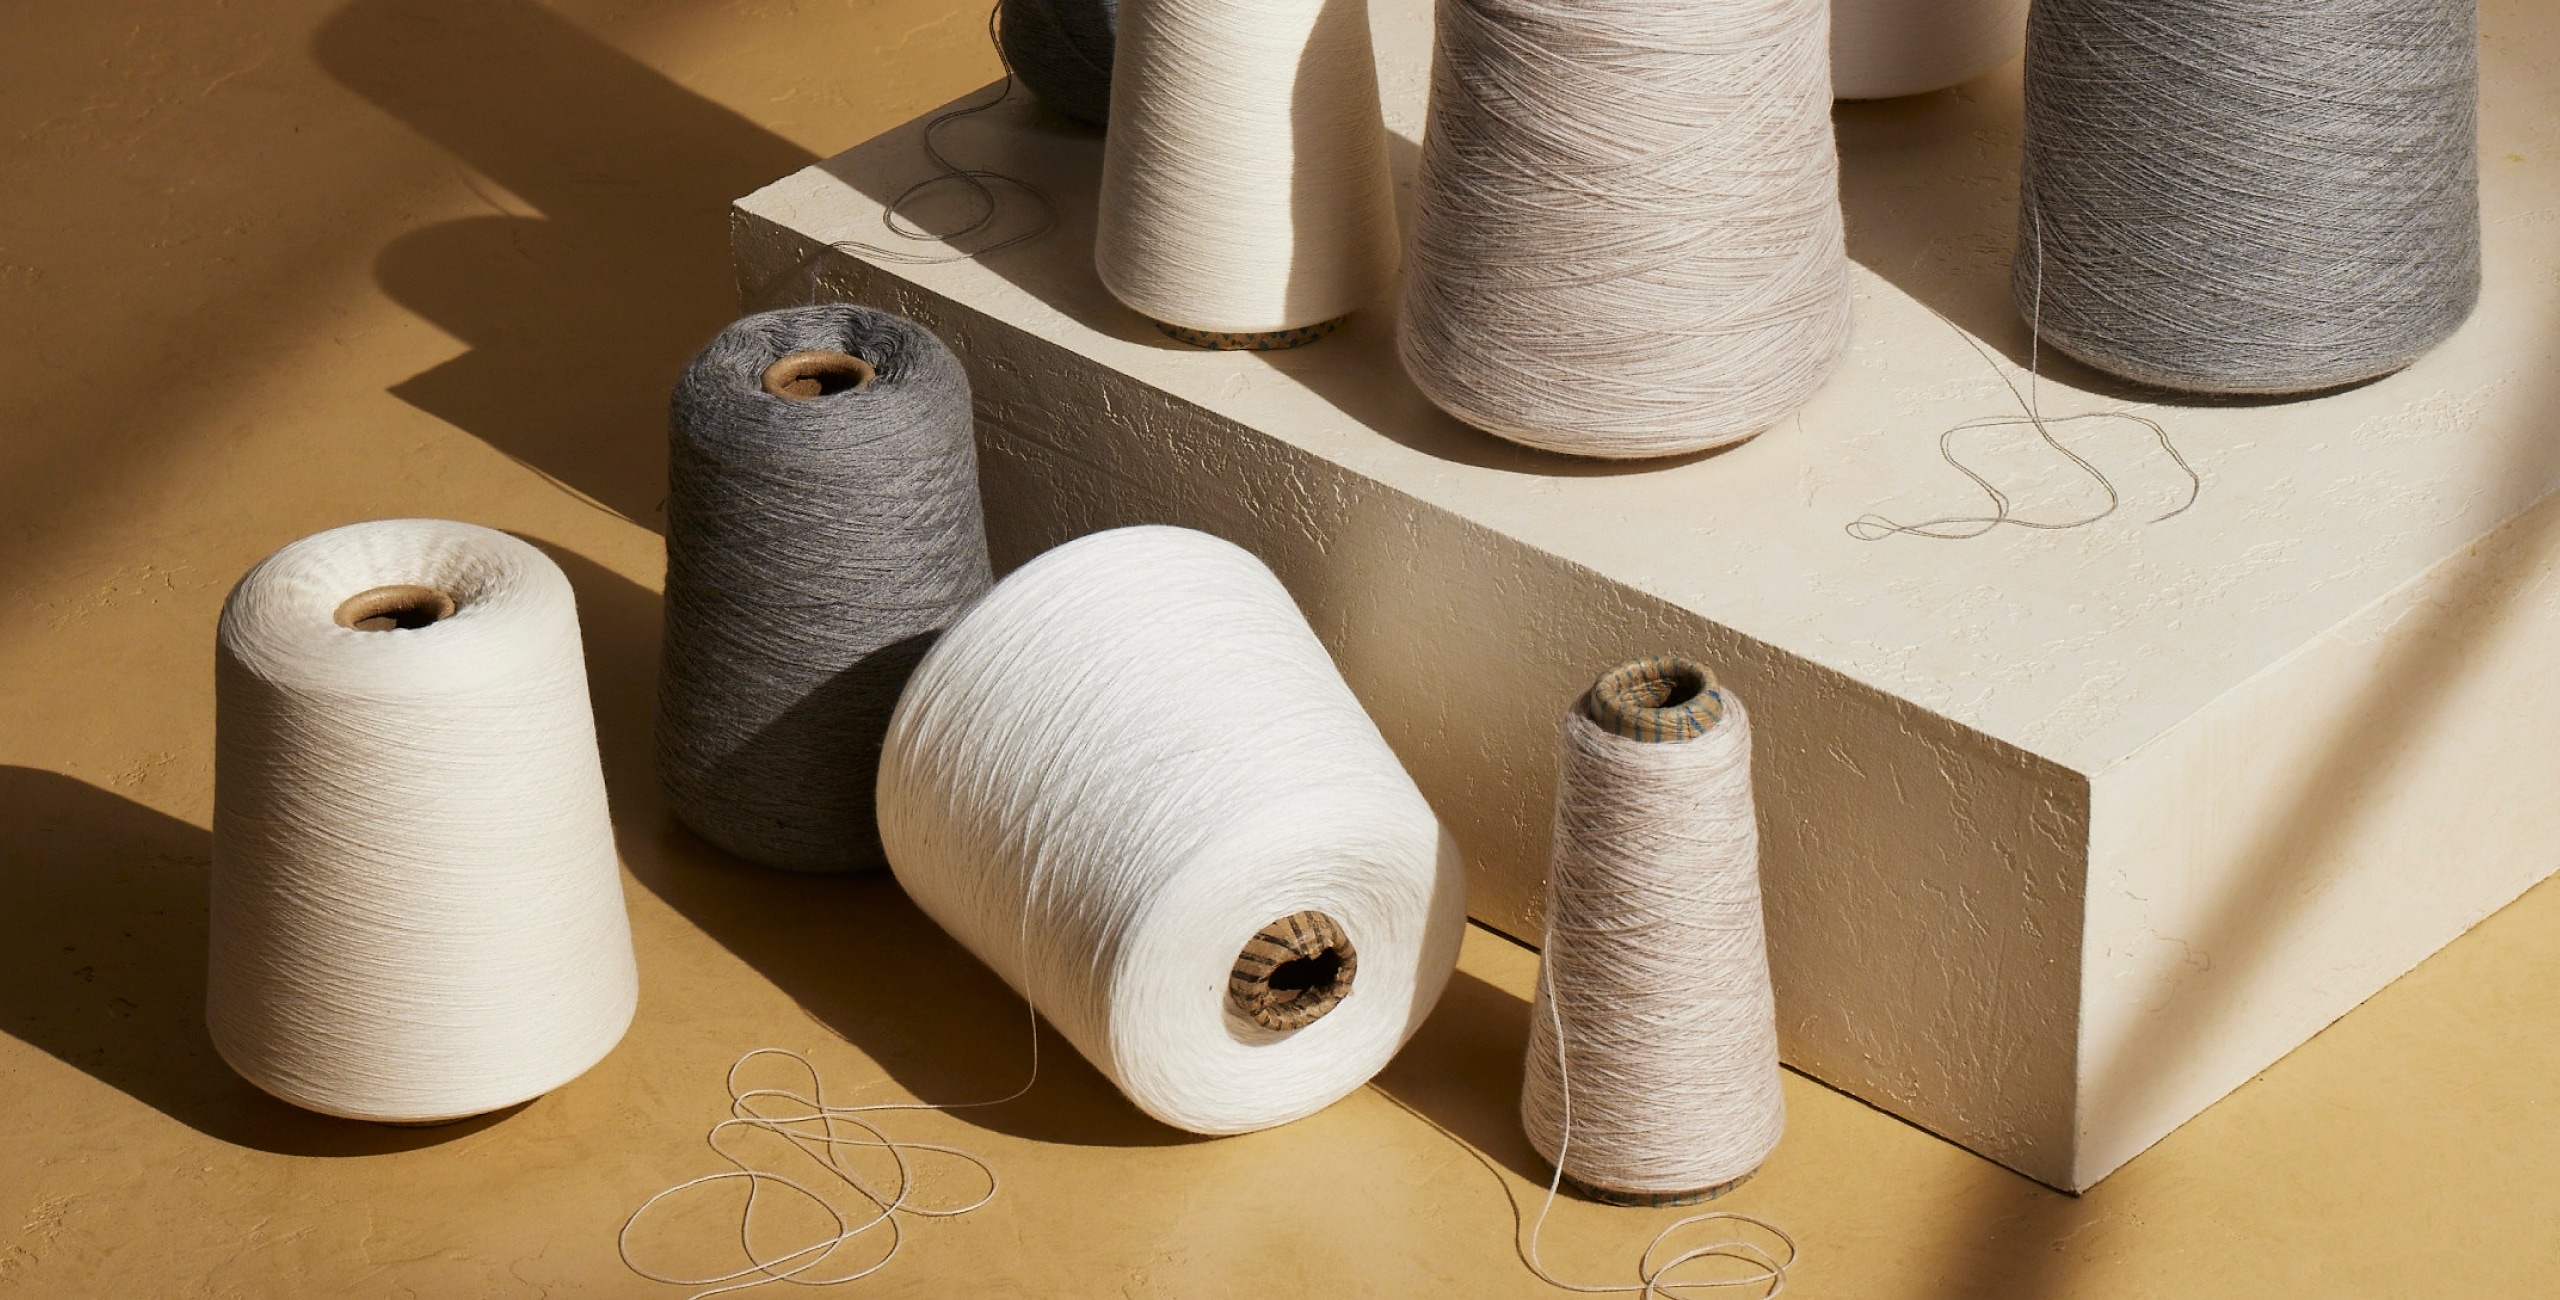 Find out the truth! While thread count is often used to describe quality,  it's just a measure of how many threads are in one square inch of fabric.